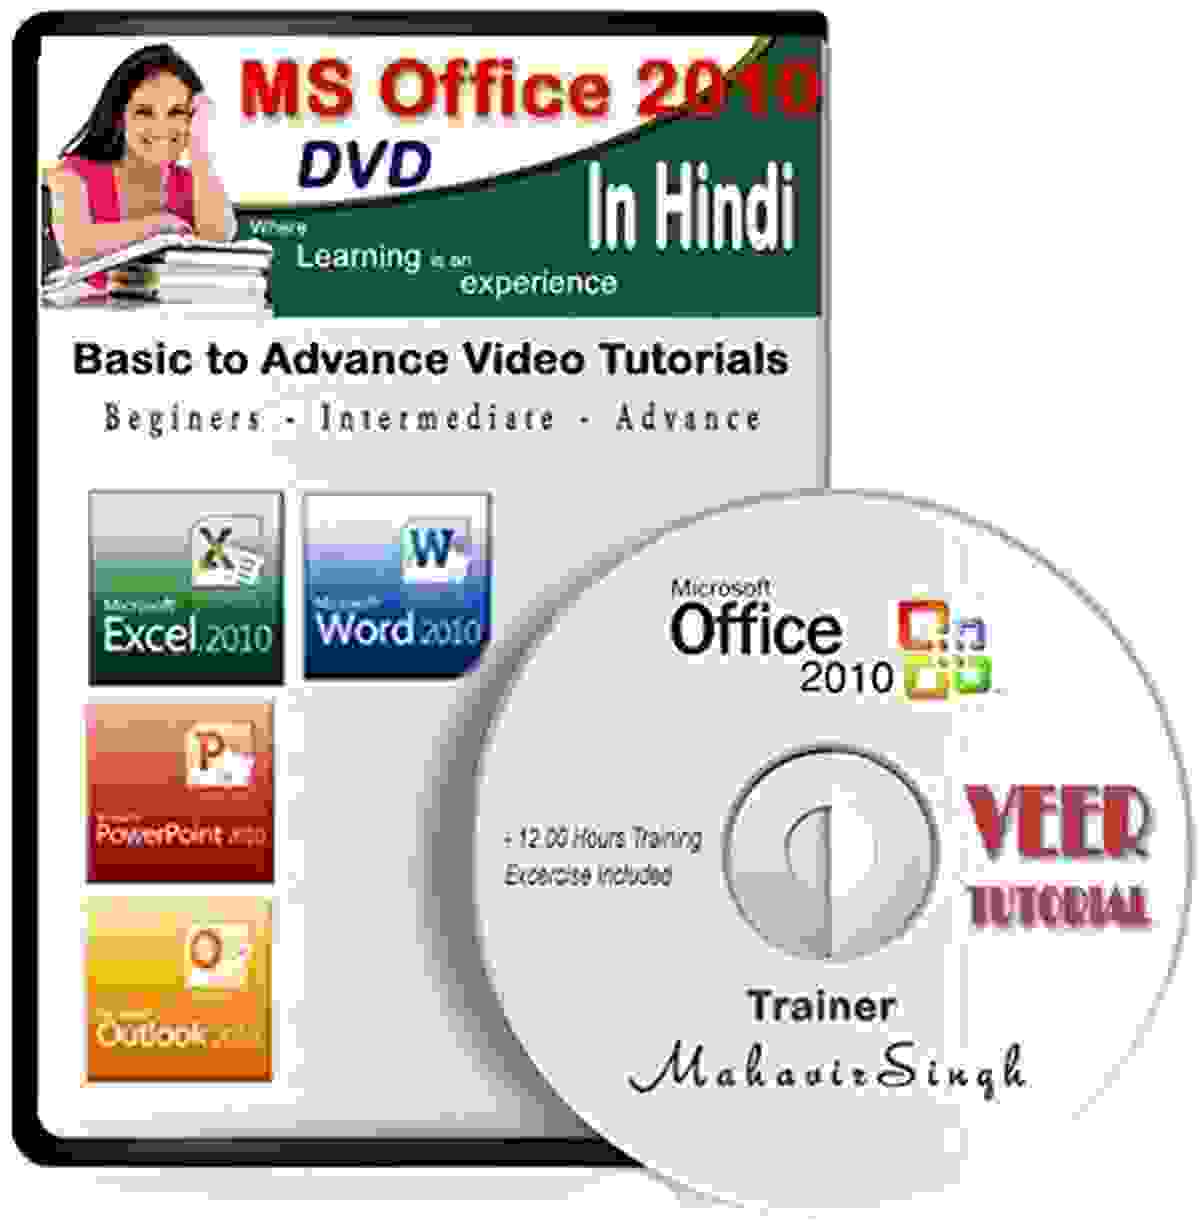 MS Office Tutorial DVD Latest Version Training in Learning Hindi Video